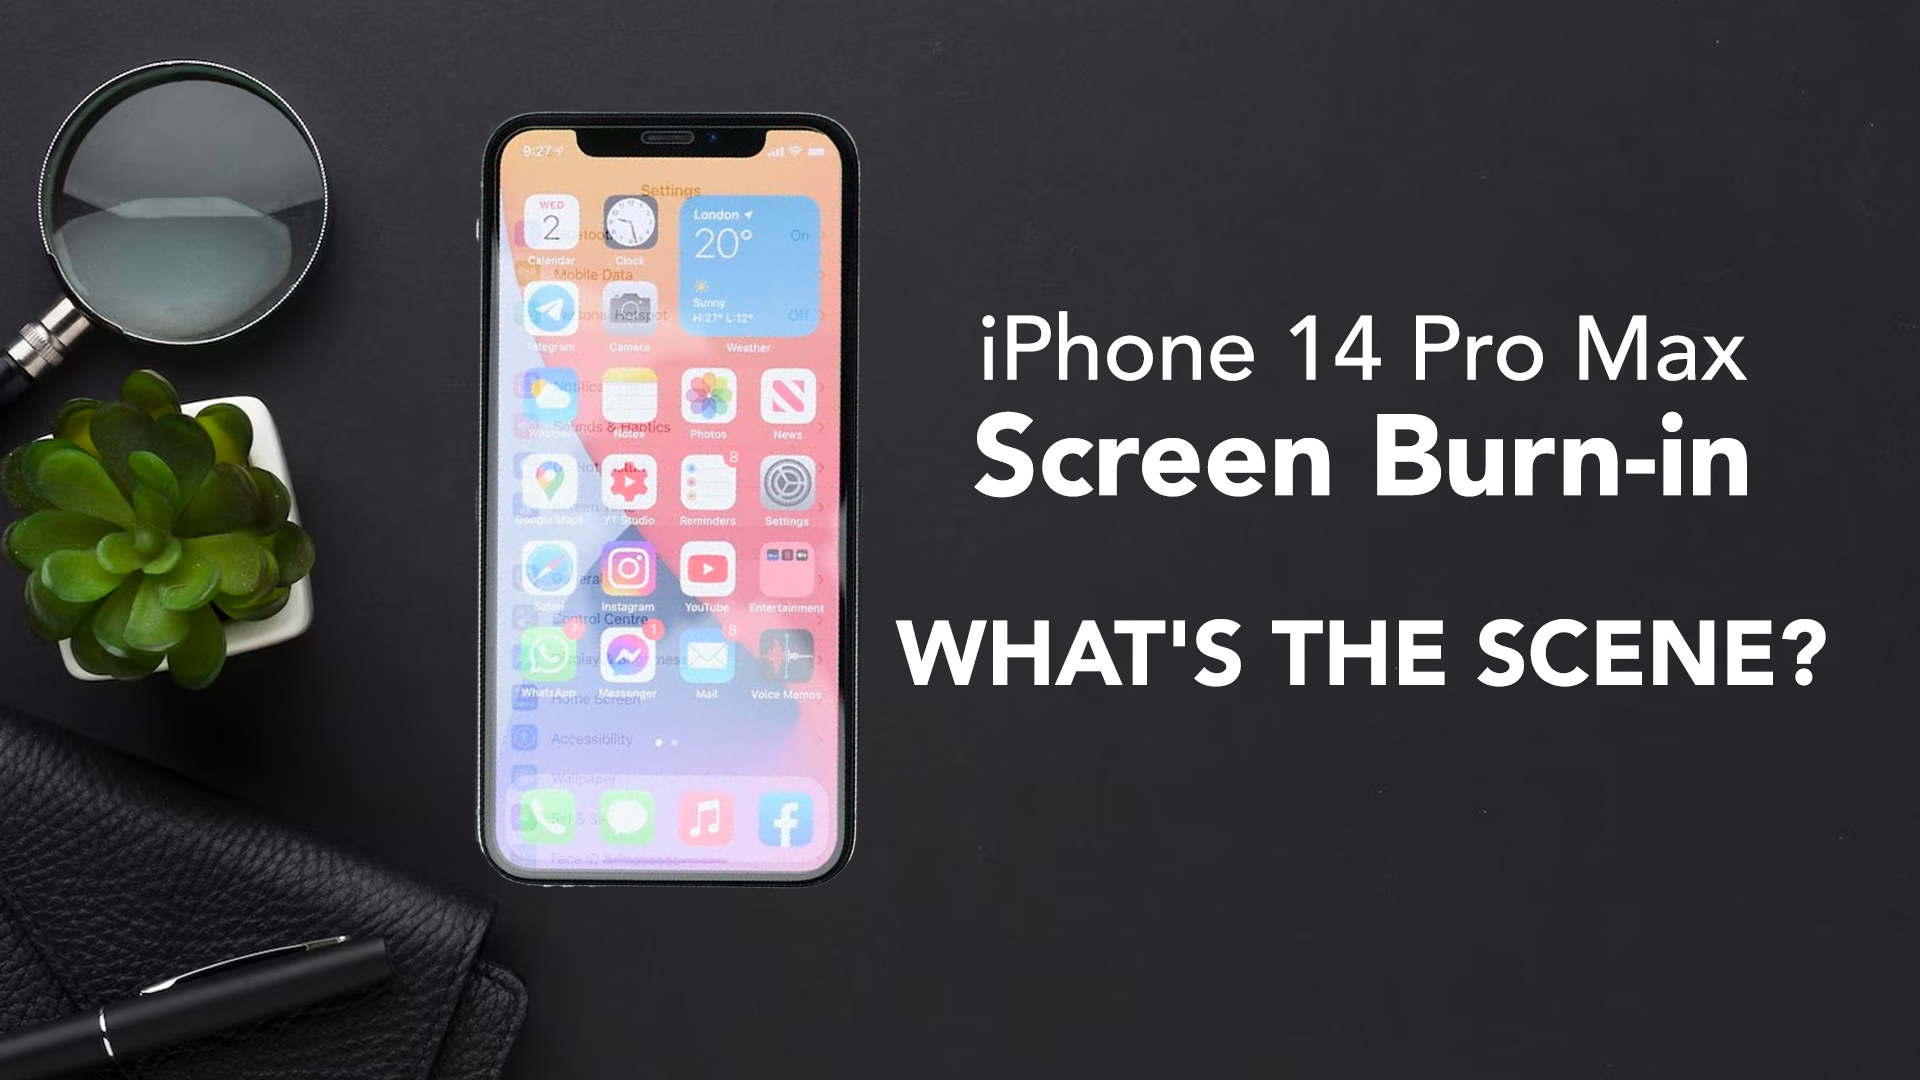 iPhone 14 Pro Max screen burn-in issue